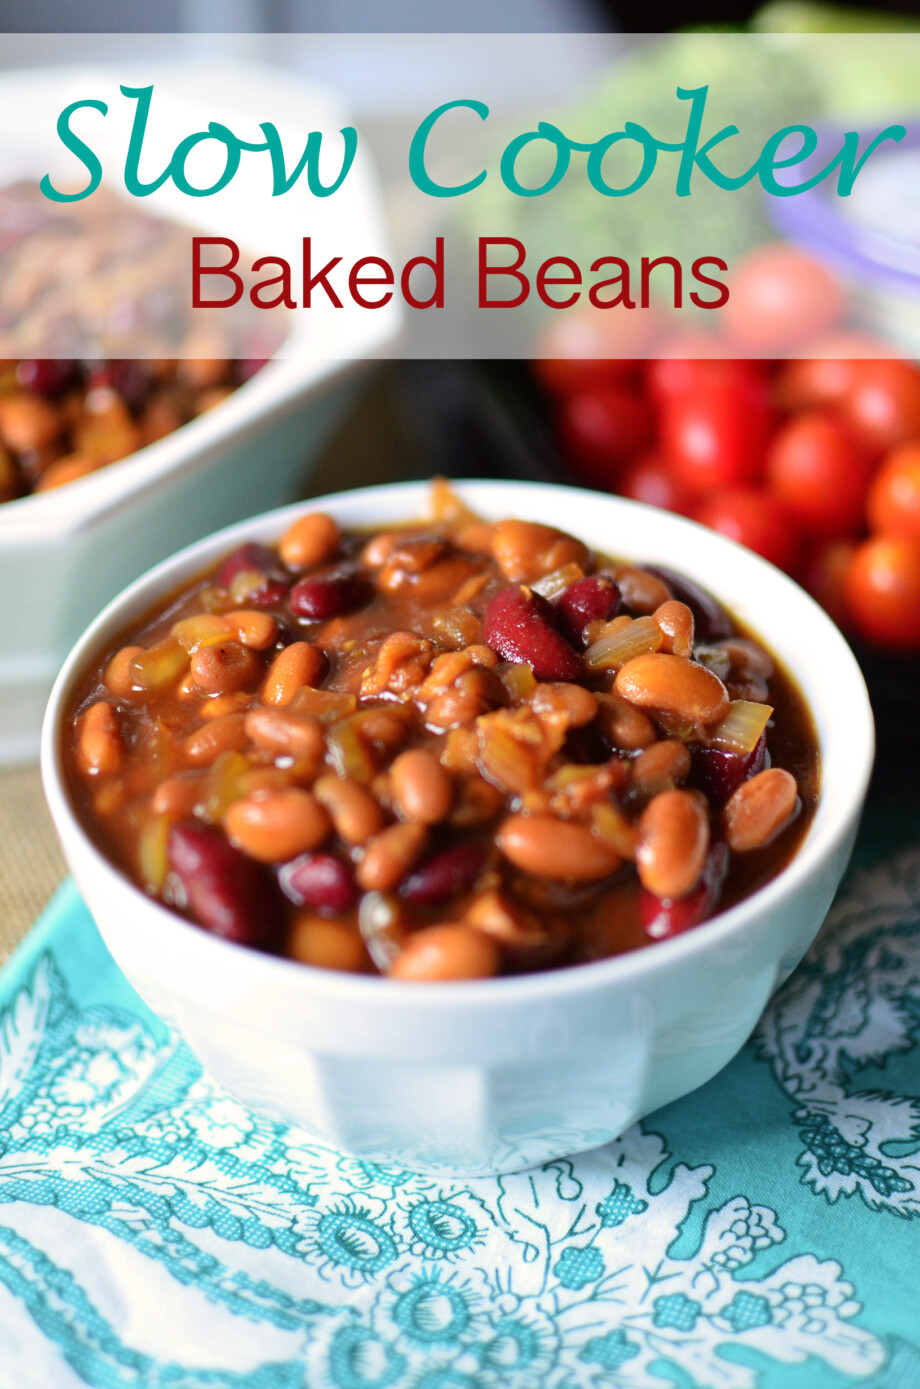 Slow Cooker Baked Beans - Simple, Sweet & Savory